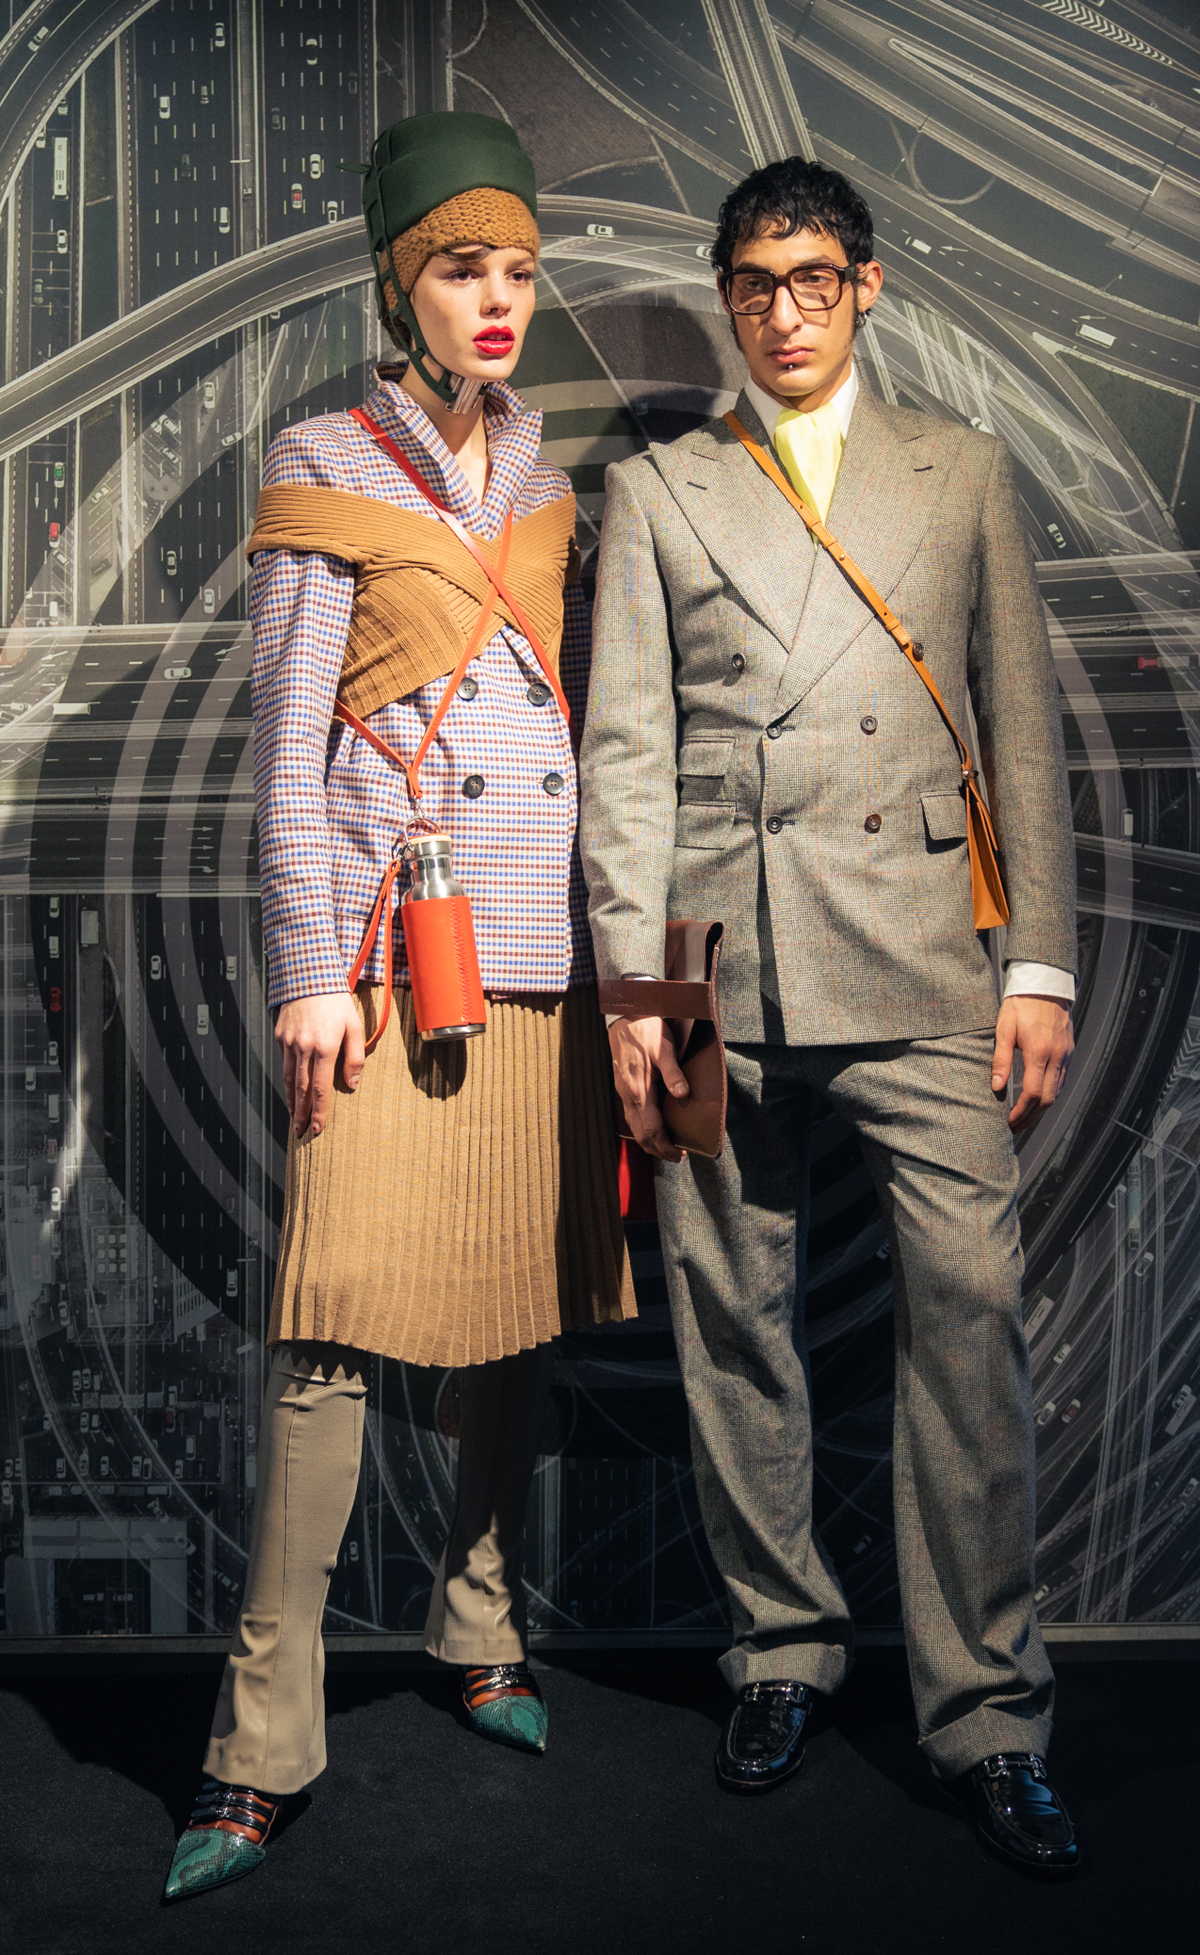 Two models wearing a blazer by Lanius, trousers & skirt by Fassbender, top by Studio Fantastique, knitted hat by Pugnat, hat by Spatz Hutdesign, bag & bottle by Trakatan, handbag by Alexandra Svendsen and shoes Miu Miu at Nightboutique Archive as well as a suit, handkerchief & collar by Maximilian Mogg, shirt by G-Star Raw, clutch by Agnes Nordenholz, crossbody bag by Alinaschuerfeld, glasses by Andy Wolf and shoes by Salvatore Ferragamo Vintage at Neonyt Installation